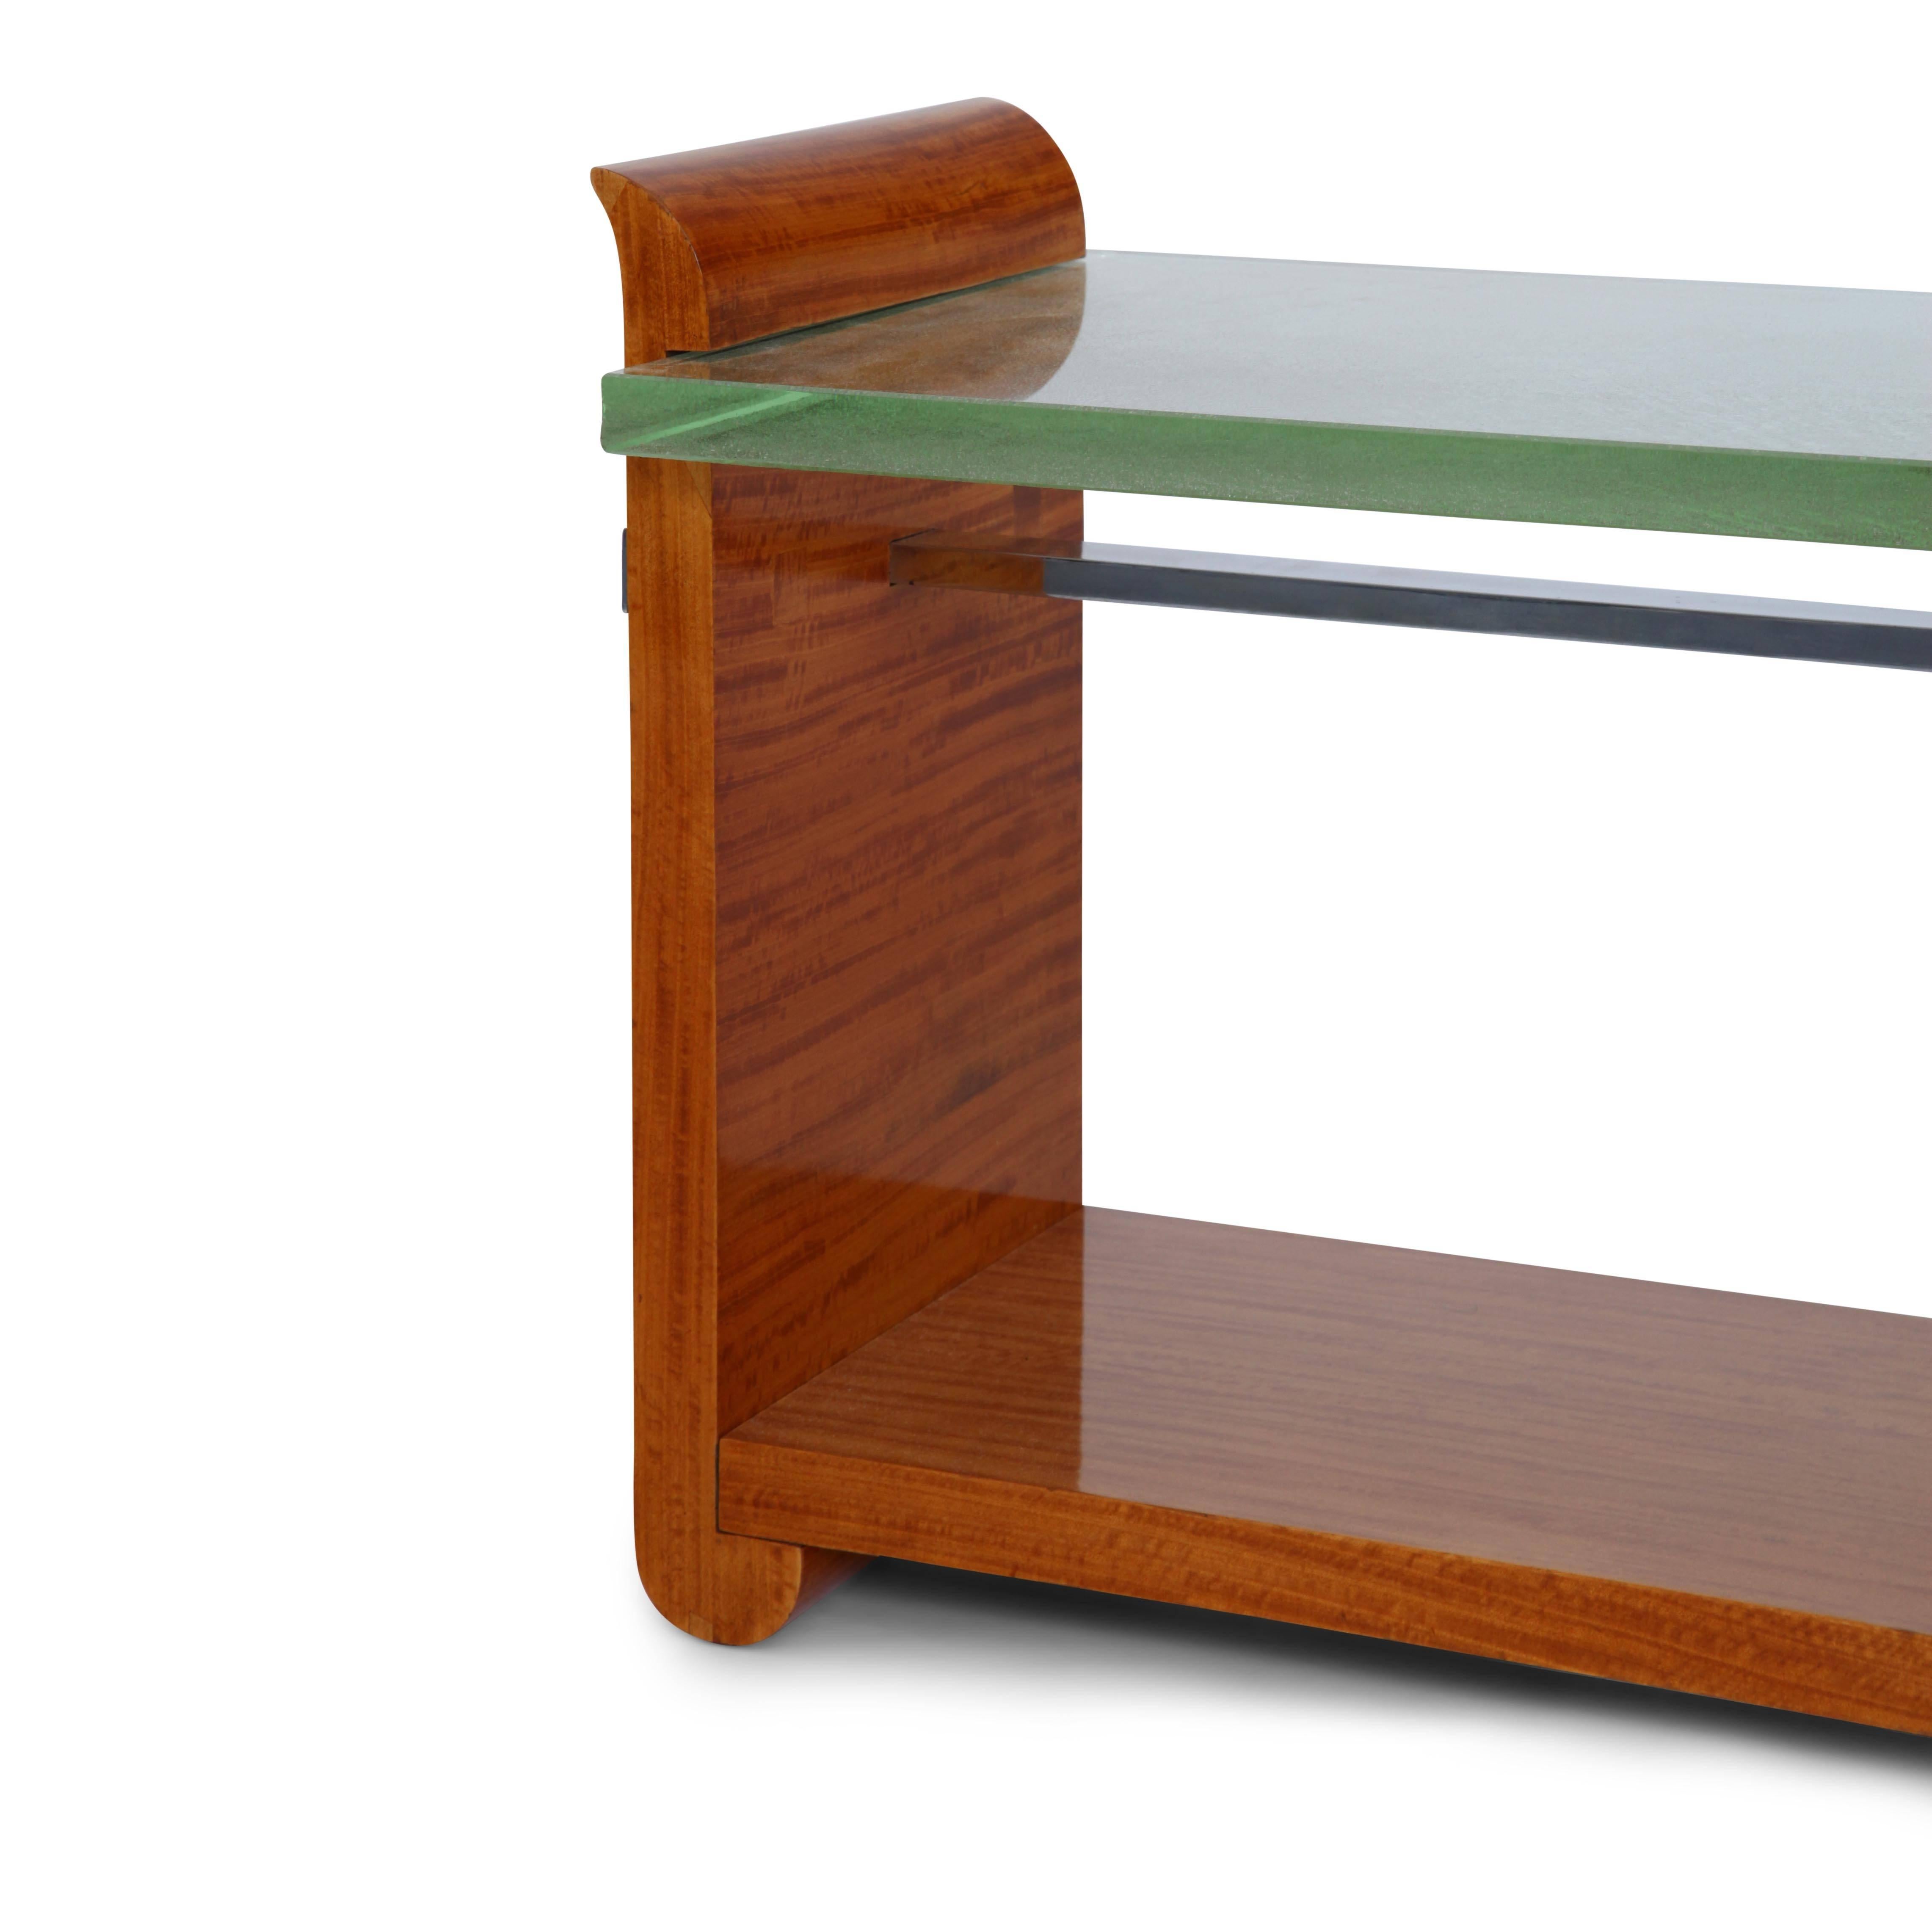 Side table of the 1930s with a thick glass top, attributed to Jacques Adnet. A metal rod stabilizes the wooden construction.